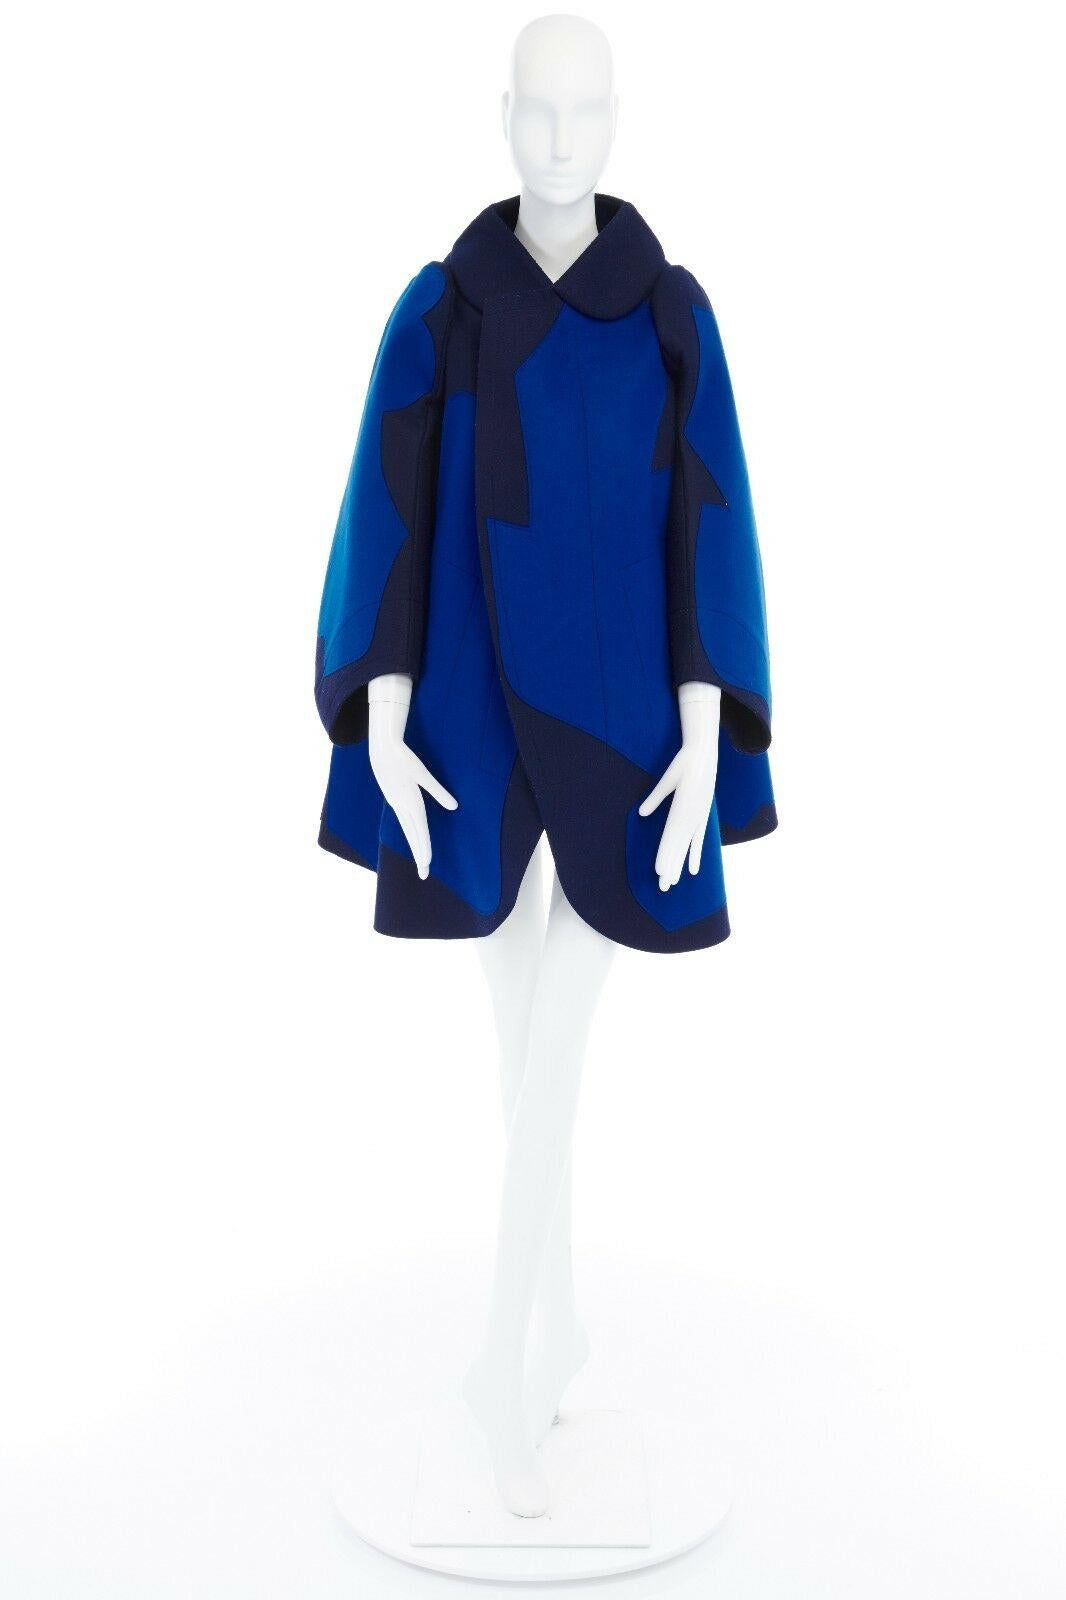 COMME DES GARCONS 
FROM THE FALL WINTER 2012 COLLECTION
Nylon, cotton, wool • Navy base with cobalt blue abstract shape stitched overlay • Flat packed design • Stiff structured wool-felt • Rounded collar • Voluminous curve-cut sleeves • Protruding